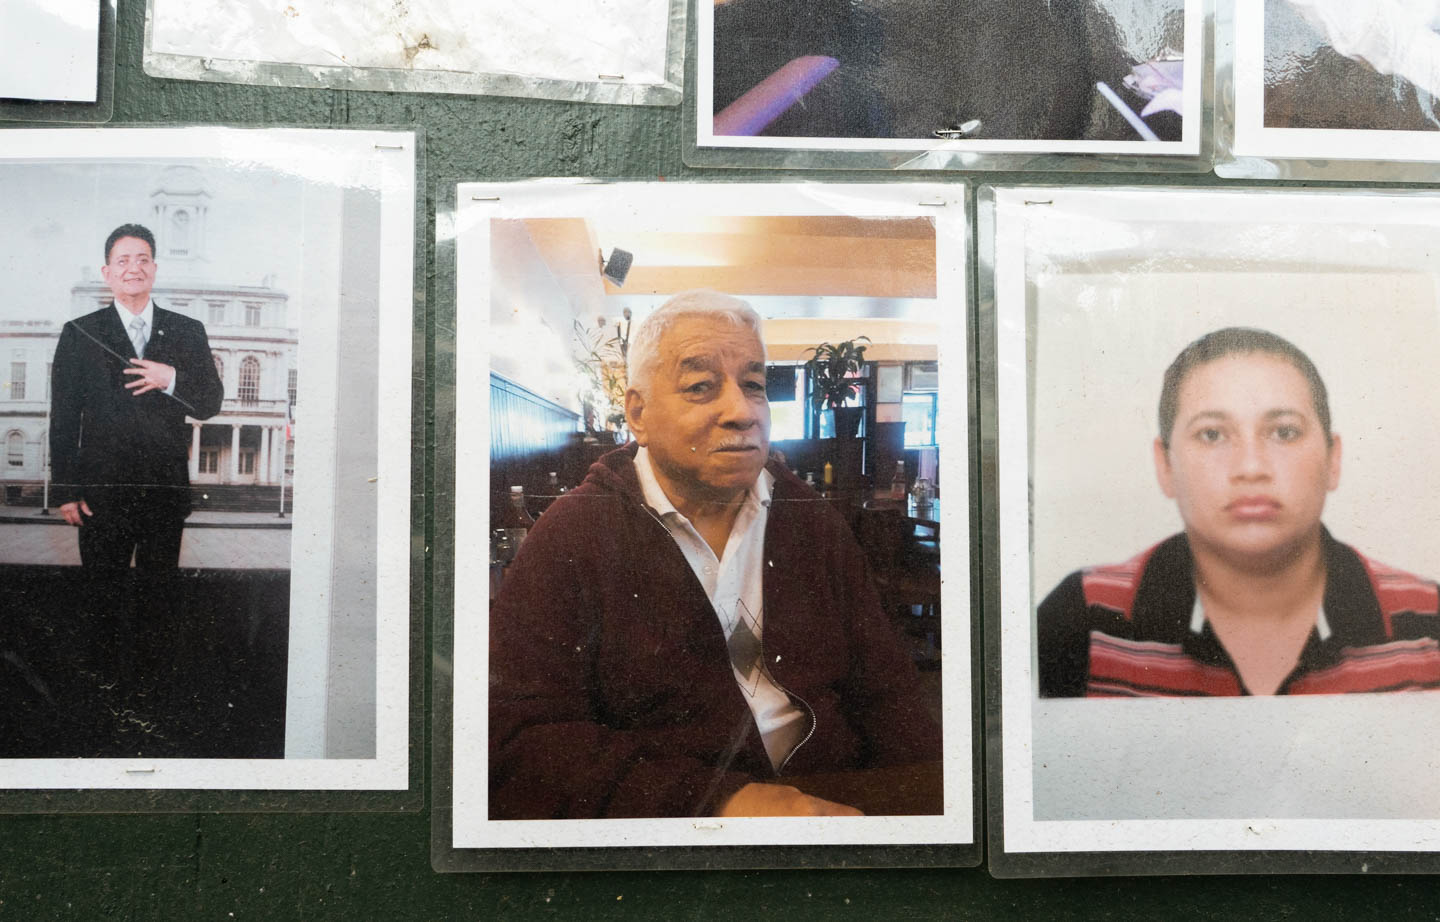 August 9, 2020: Rodrigo Caleno (left) and Carlos Ortiz (center), victims of the pandemic. “Memorial to Those Who Walked With Us,” by Make the Road New York, depicting young and old residents of Corona killed by Covid-19. 104-21 Roosevelt Avenue, Queens, New York. © Camilo José Vergara